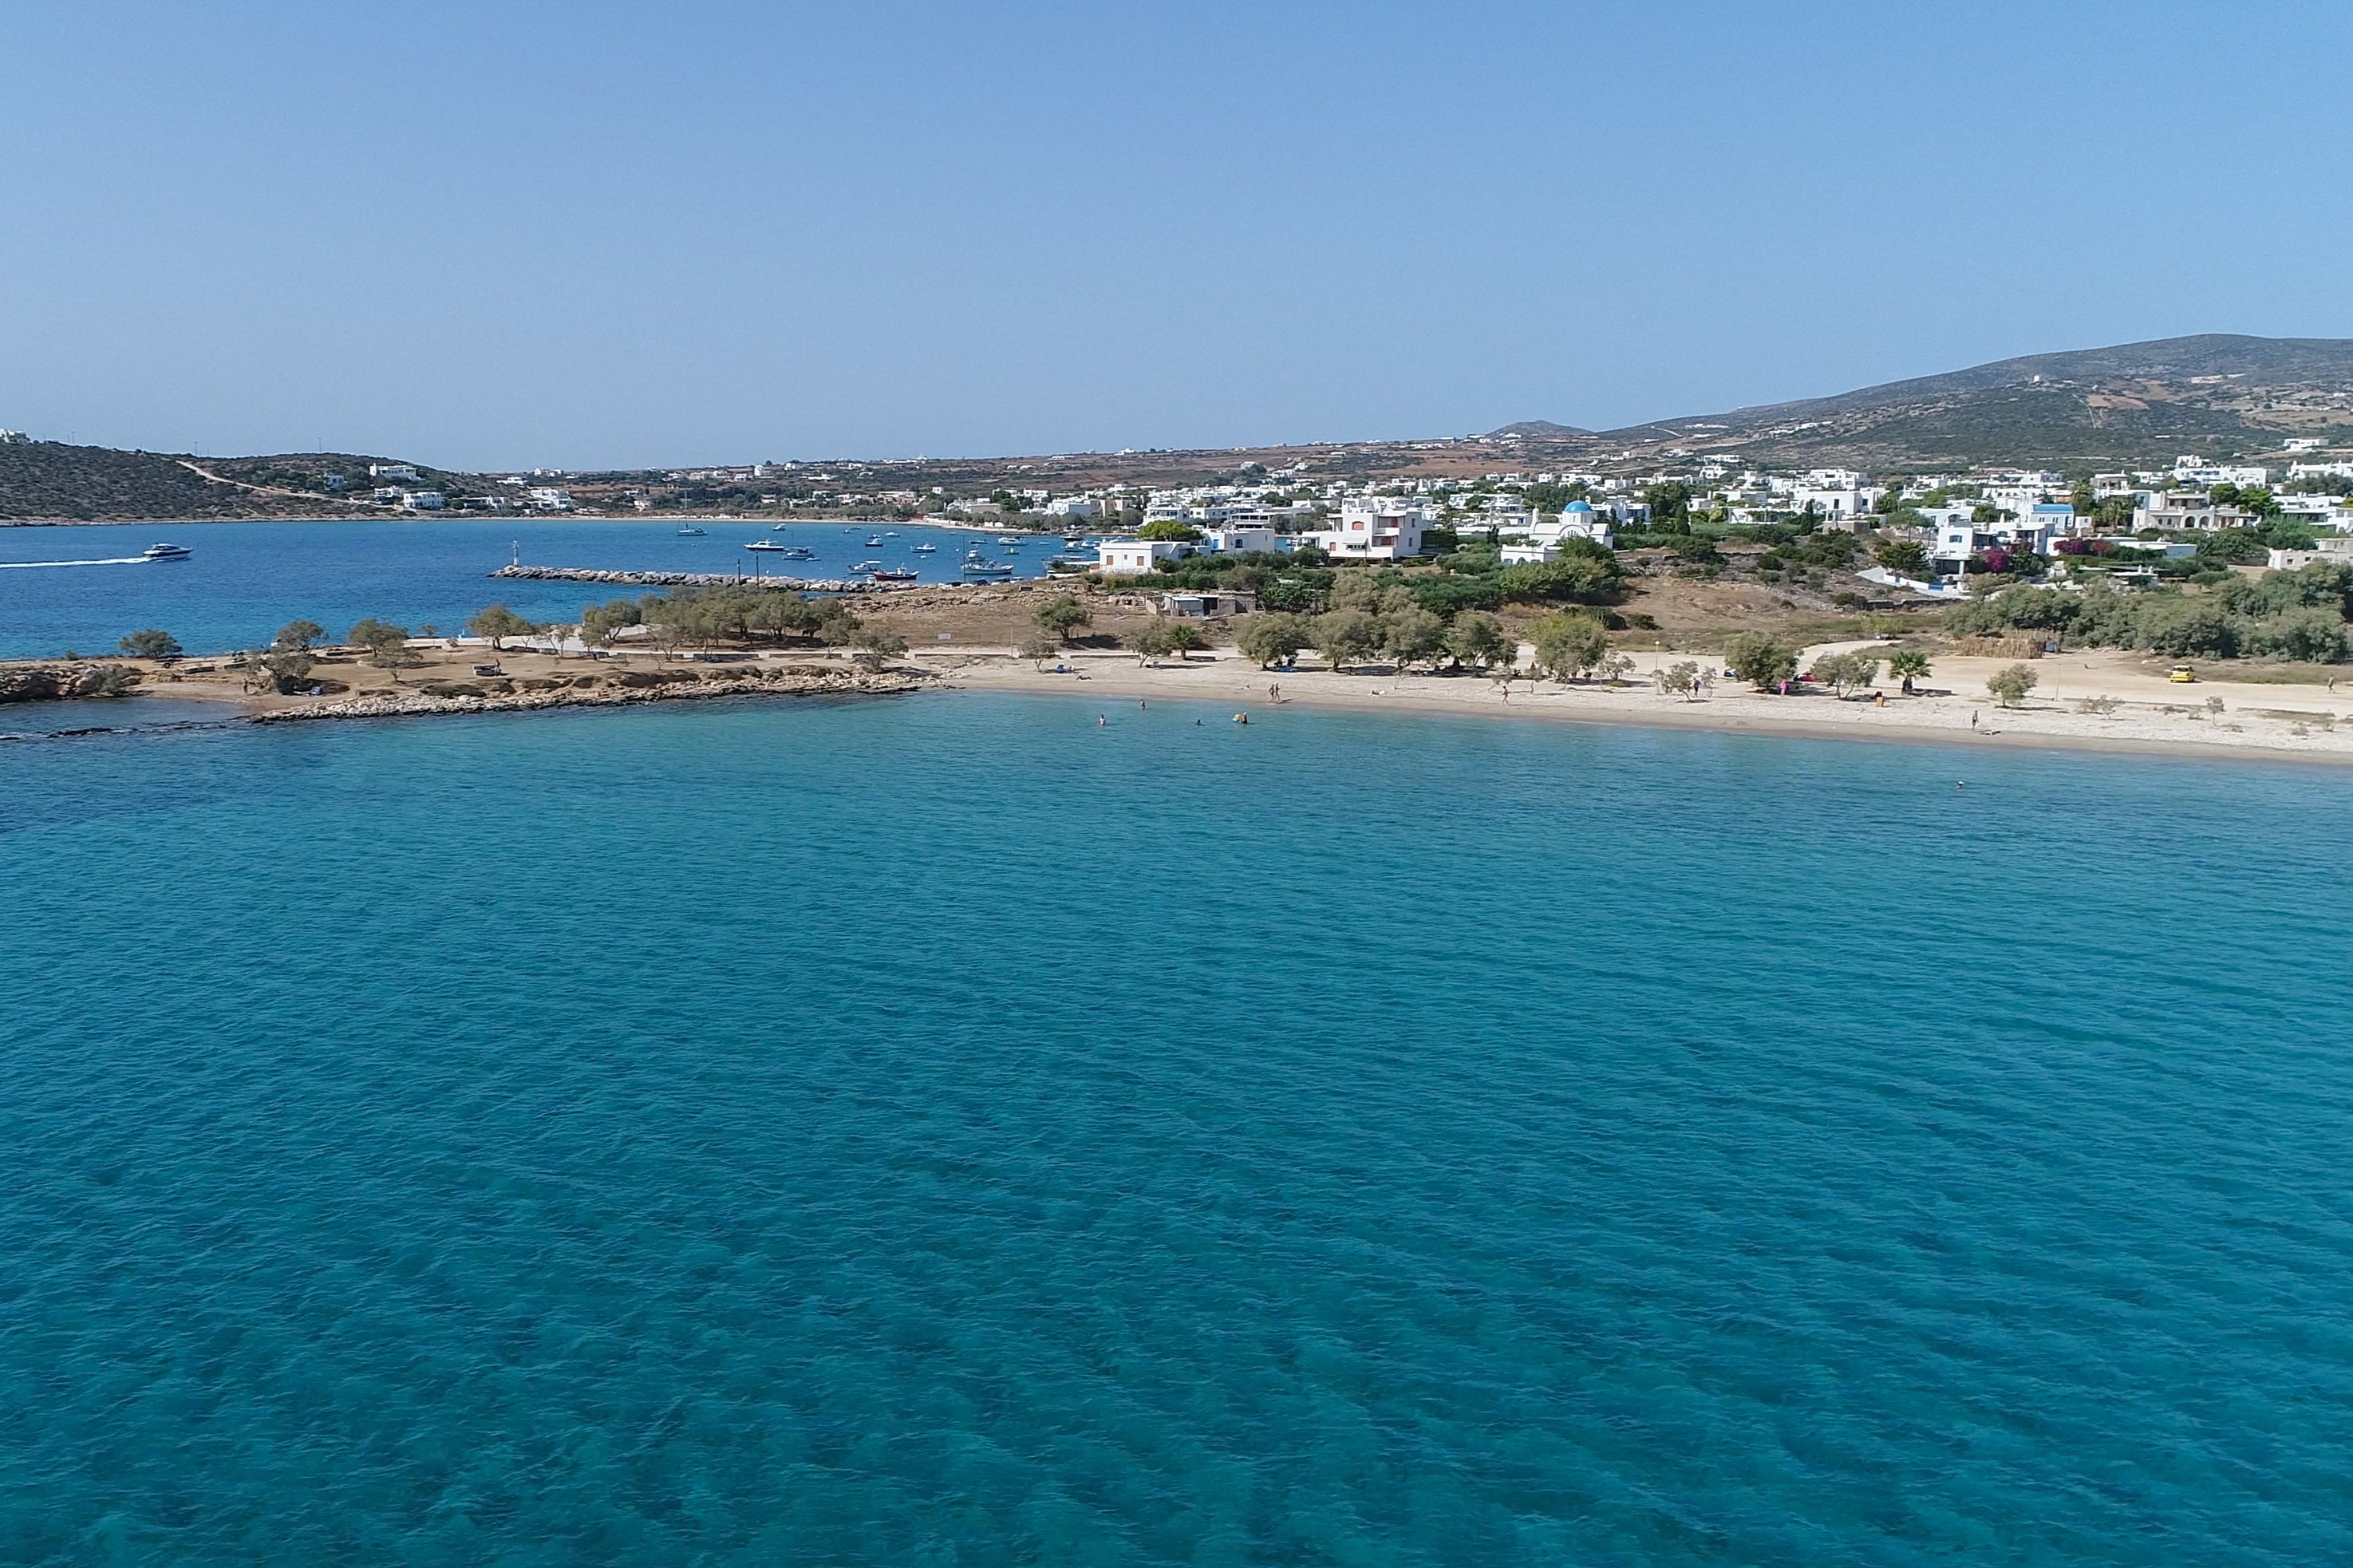 The accident took place on the Greek island of Naxos